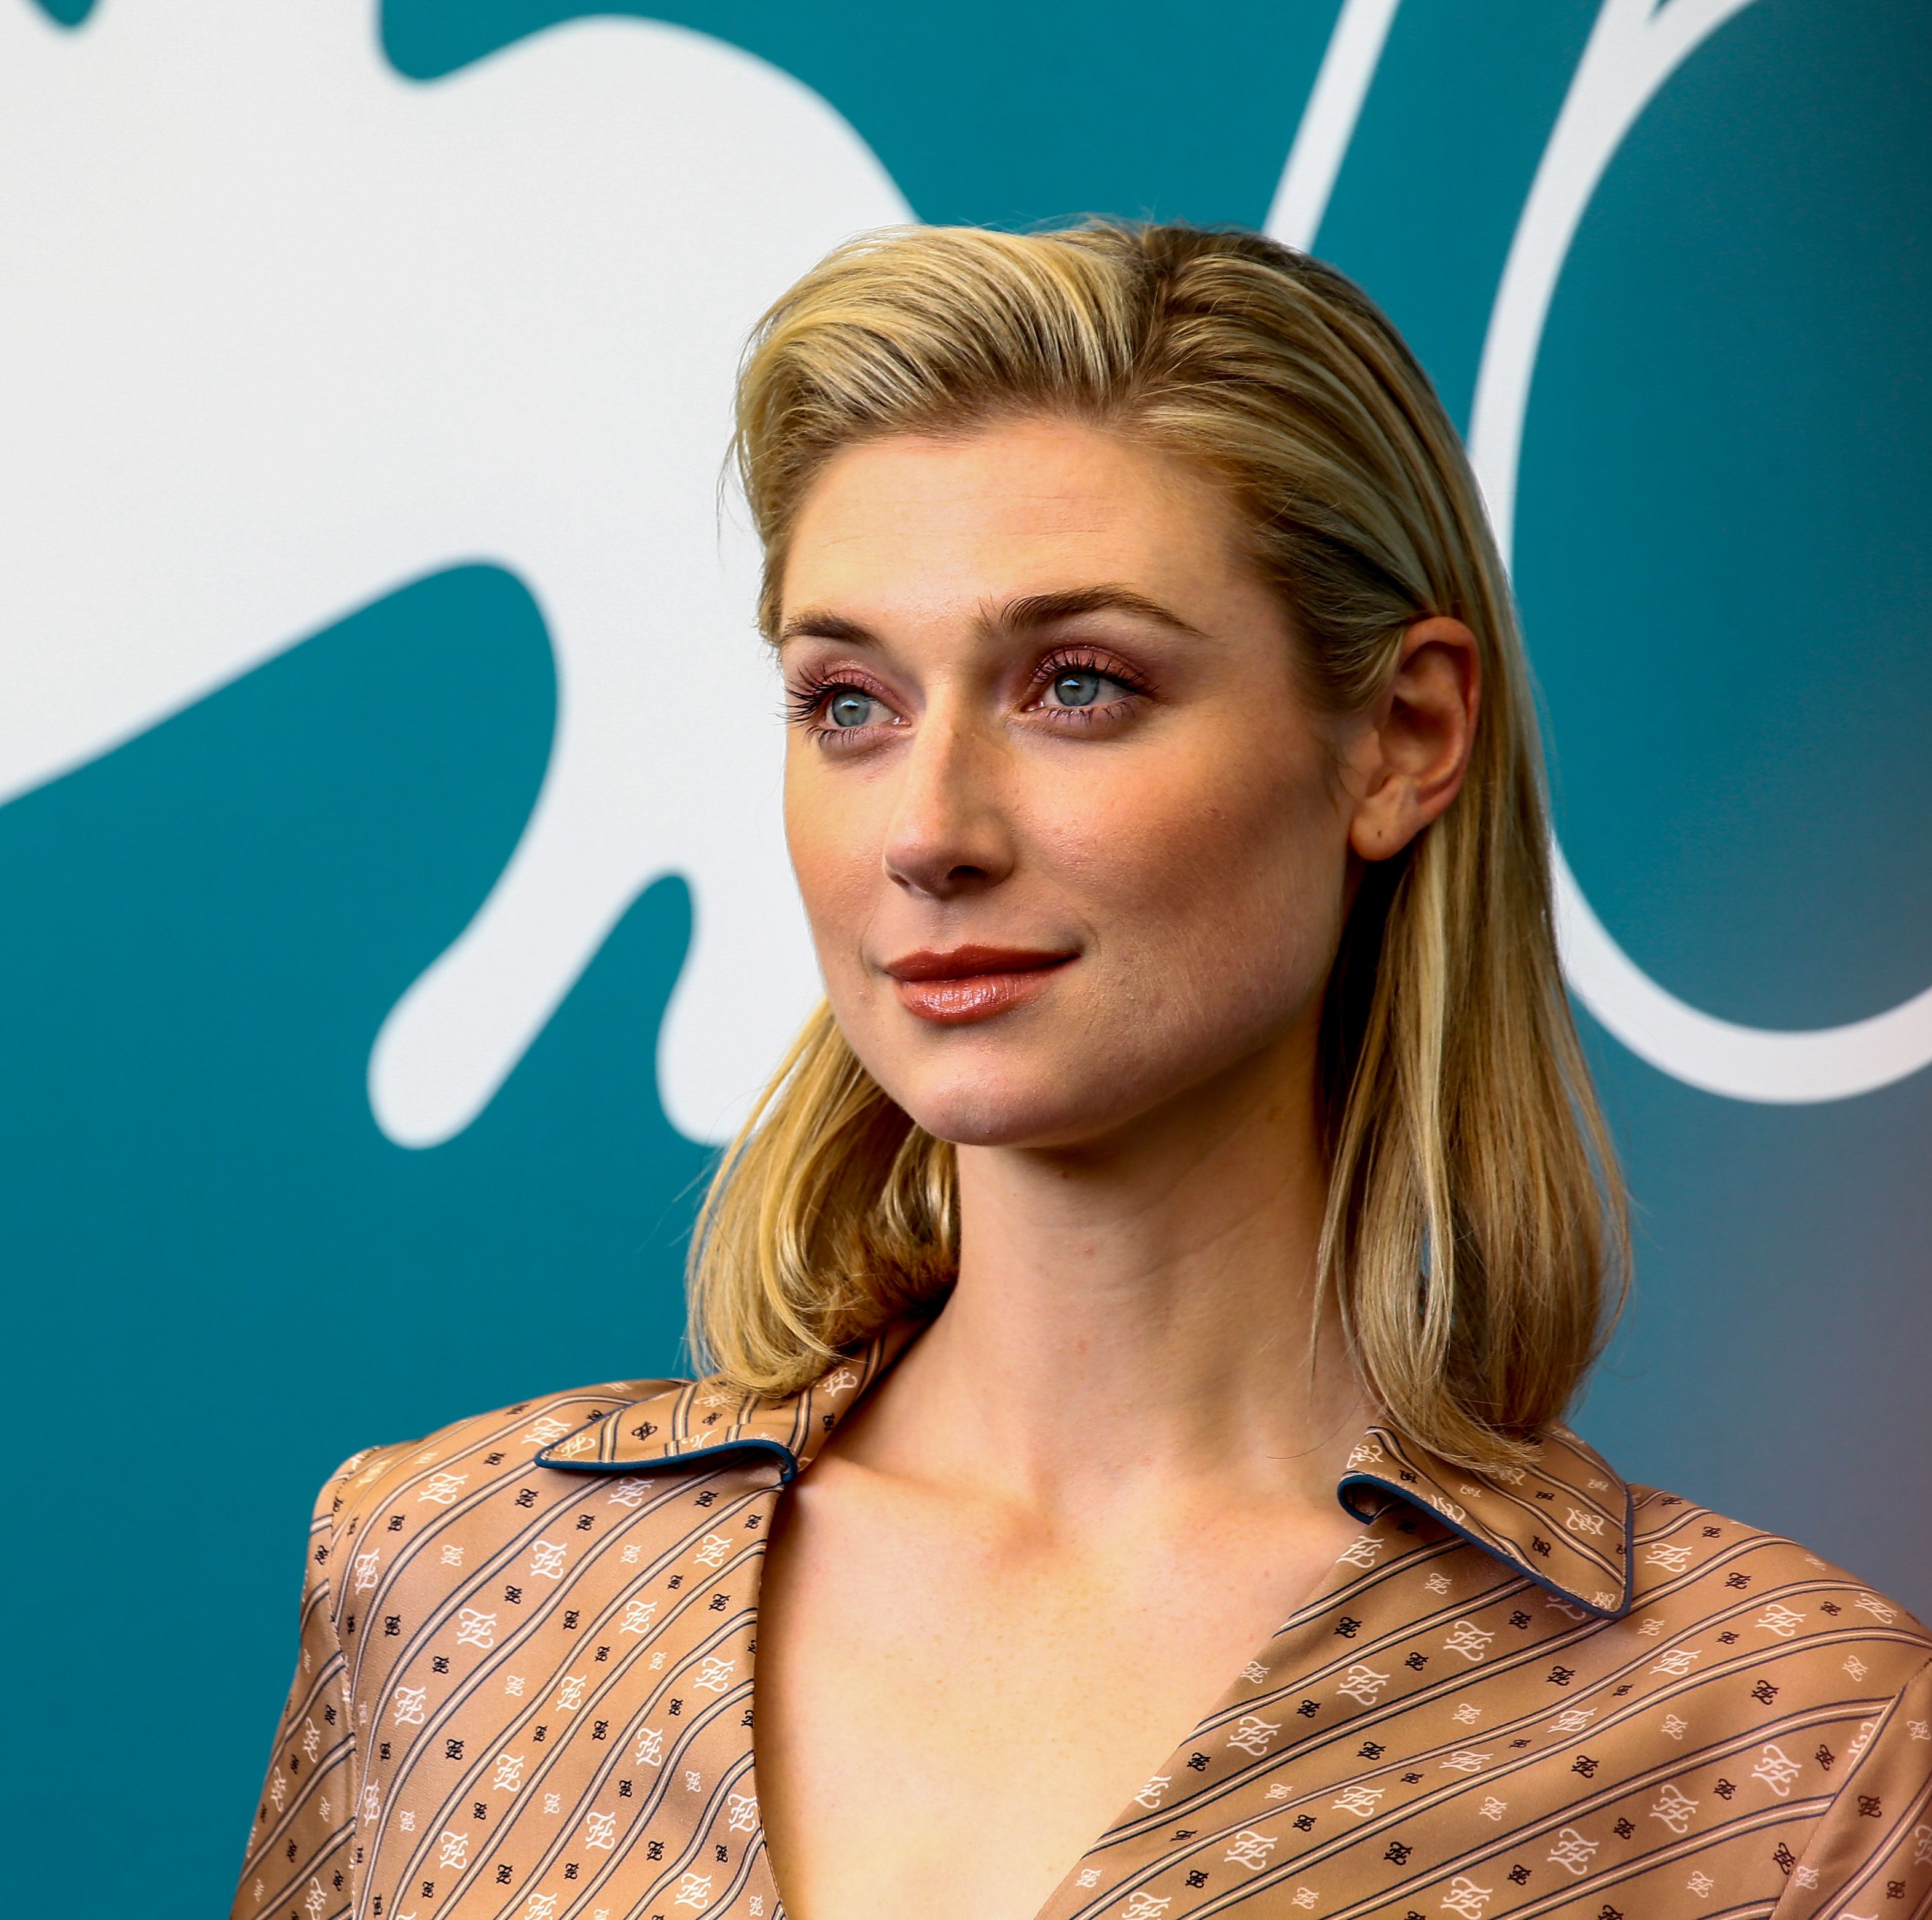 The 8 Best Elizabeth Debicki Movies and TV Shows, From Shakespeare To Sci-fi